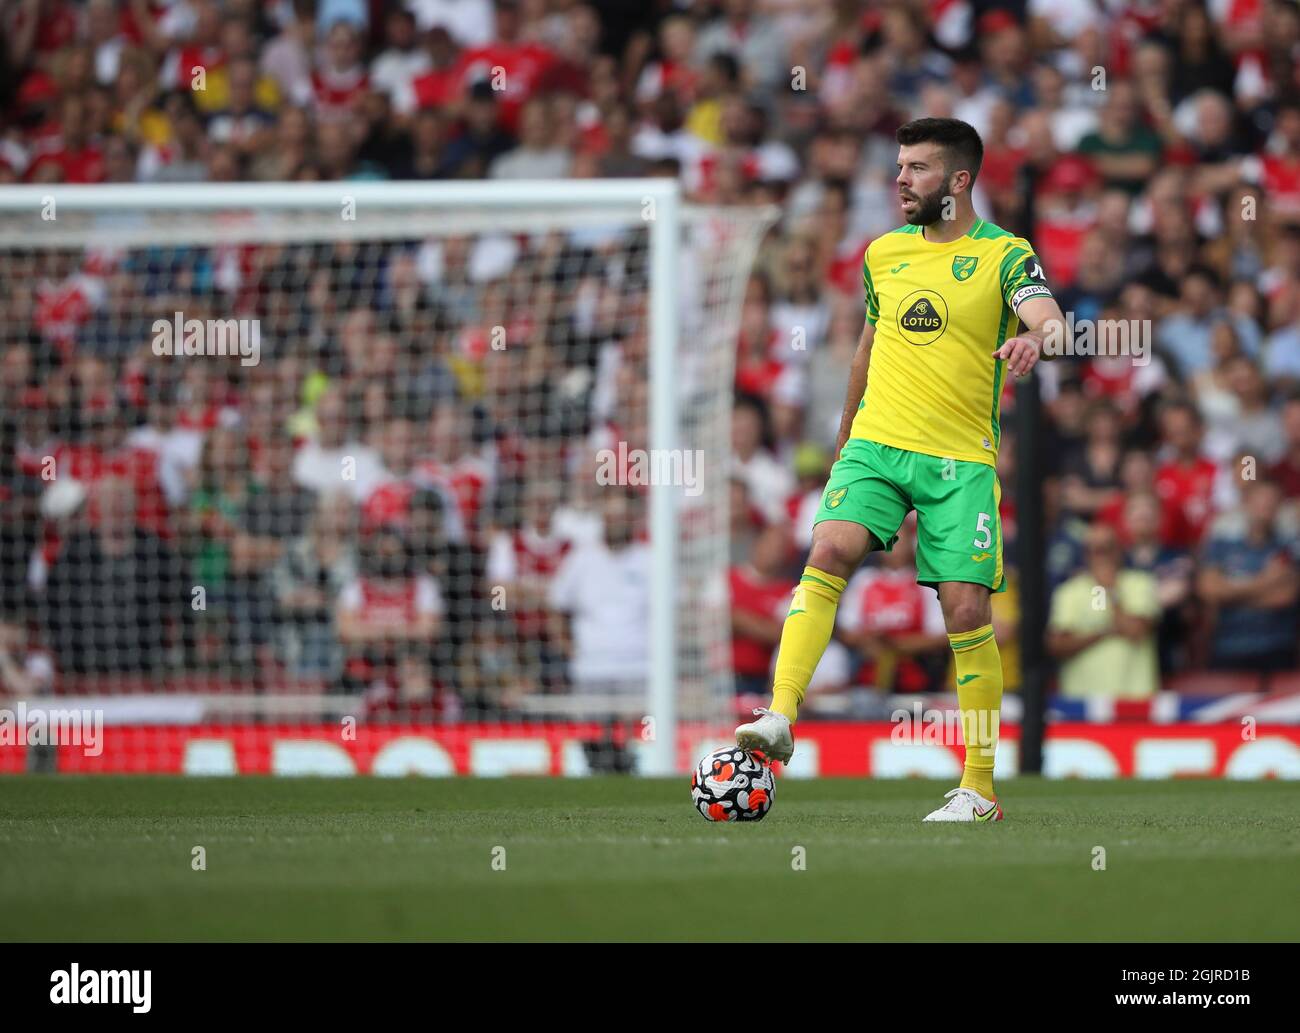 London, UK. 11th Sep, 2021. Grant Hanley (NC) at the EPL match Arsenal v Norwich City, at the Emirates Stadium, London, UK on 11th September, 2021. Credit: Paul Marriott/Alamy Live News Stock Photo